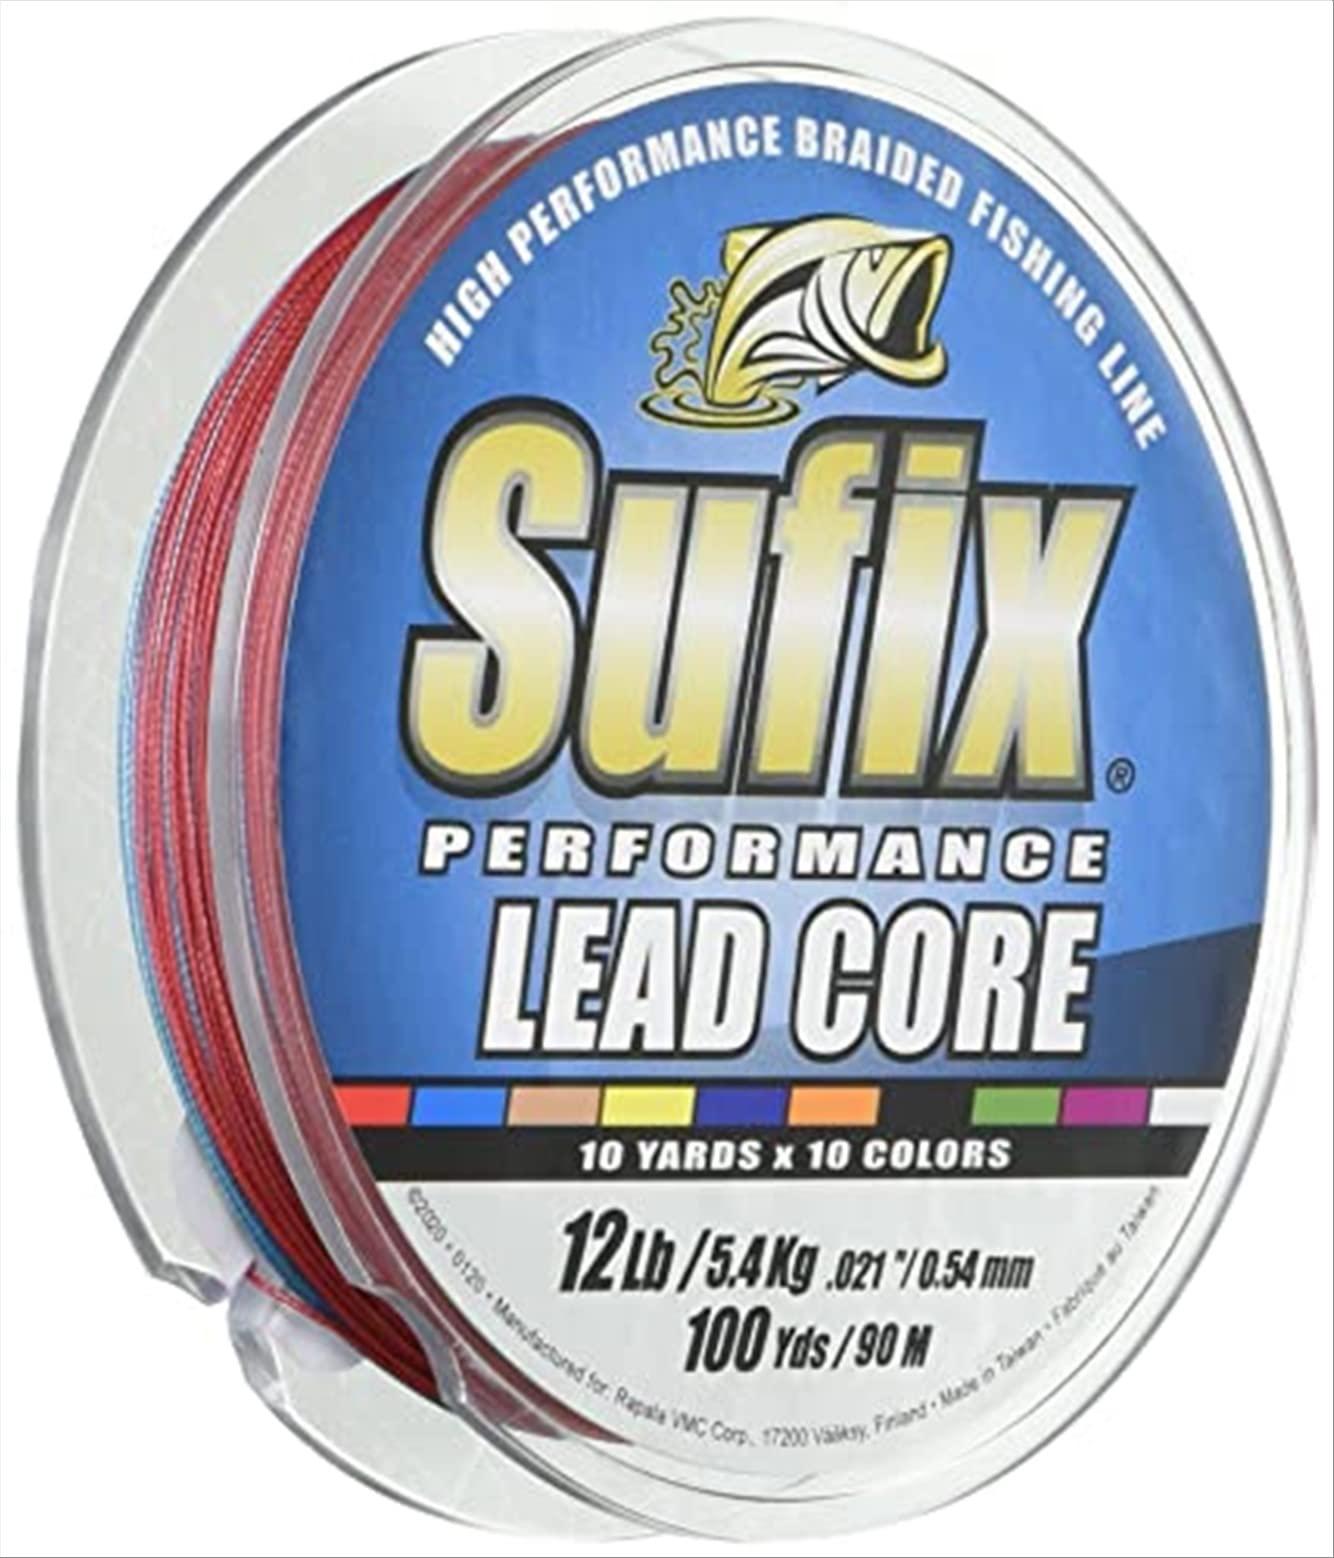 Sufix Performance Lead Core 100 Yards Metered Fishing Line One Size